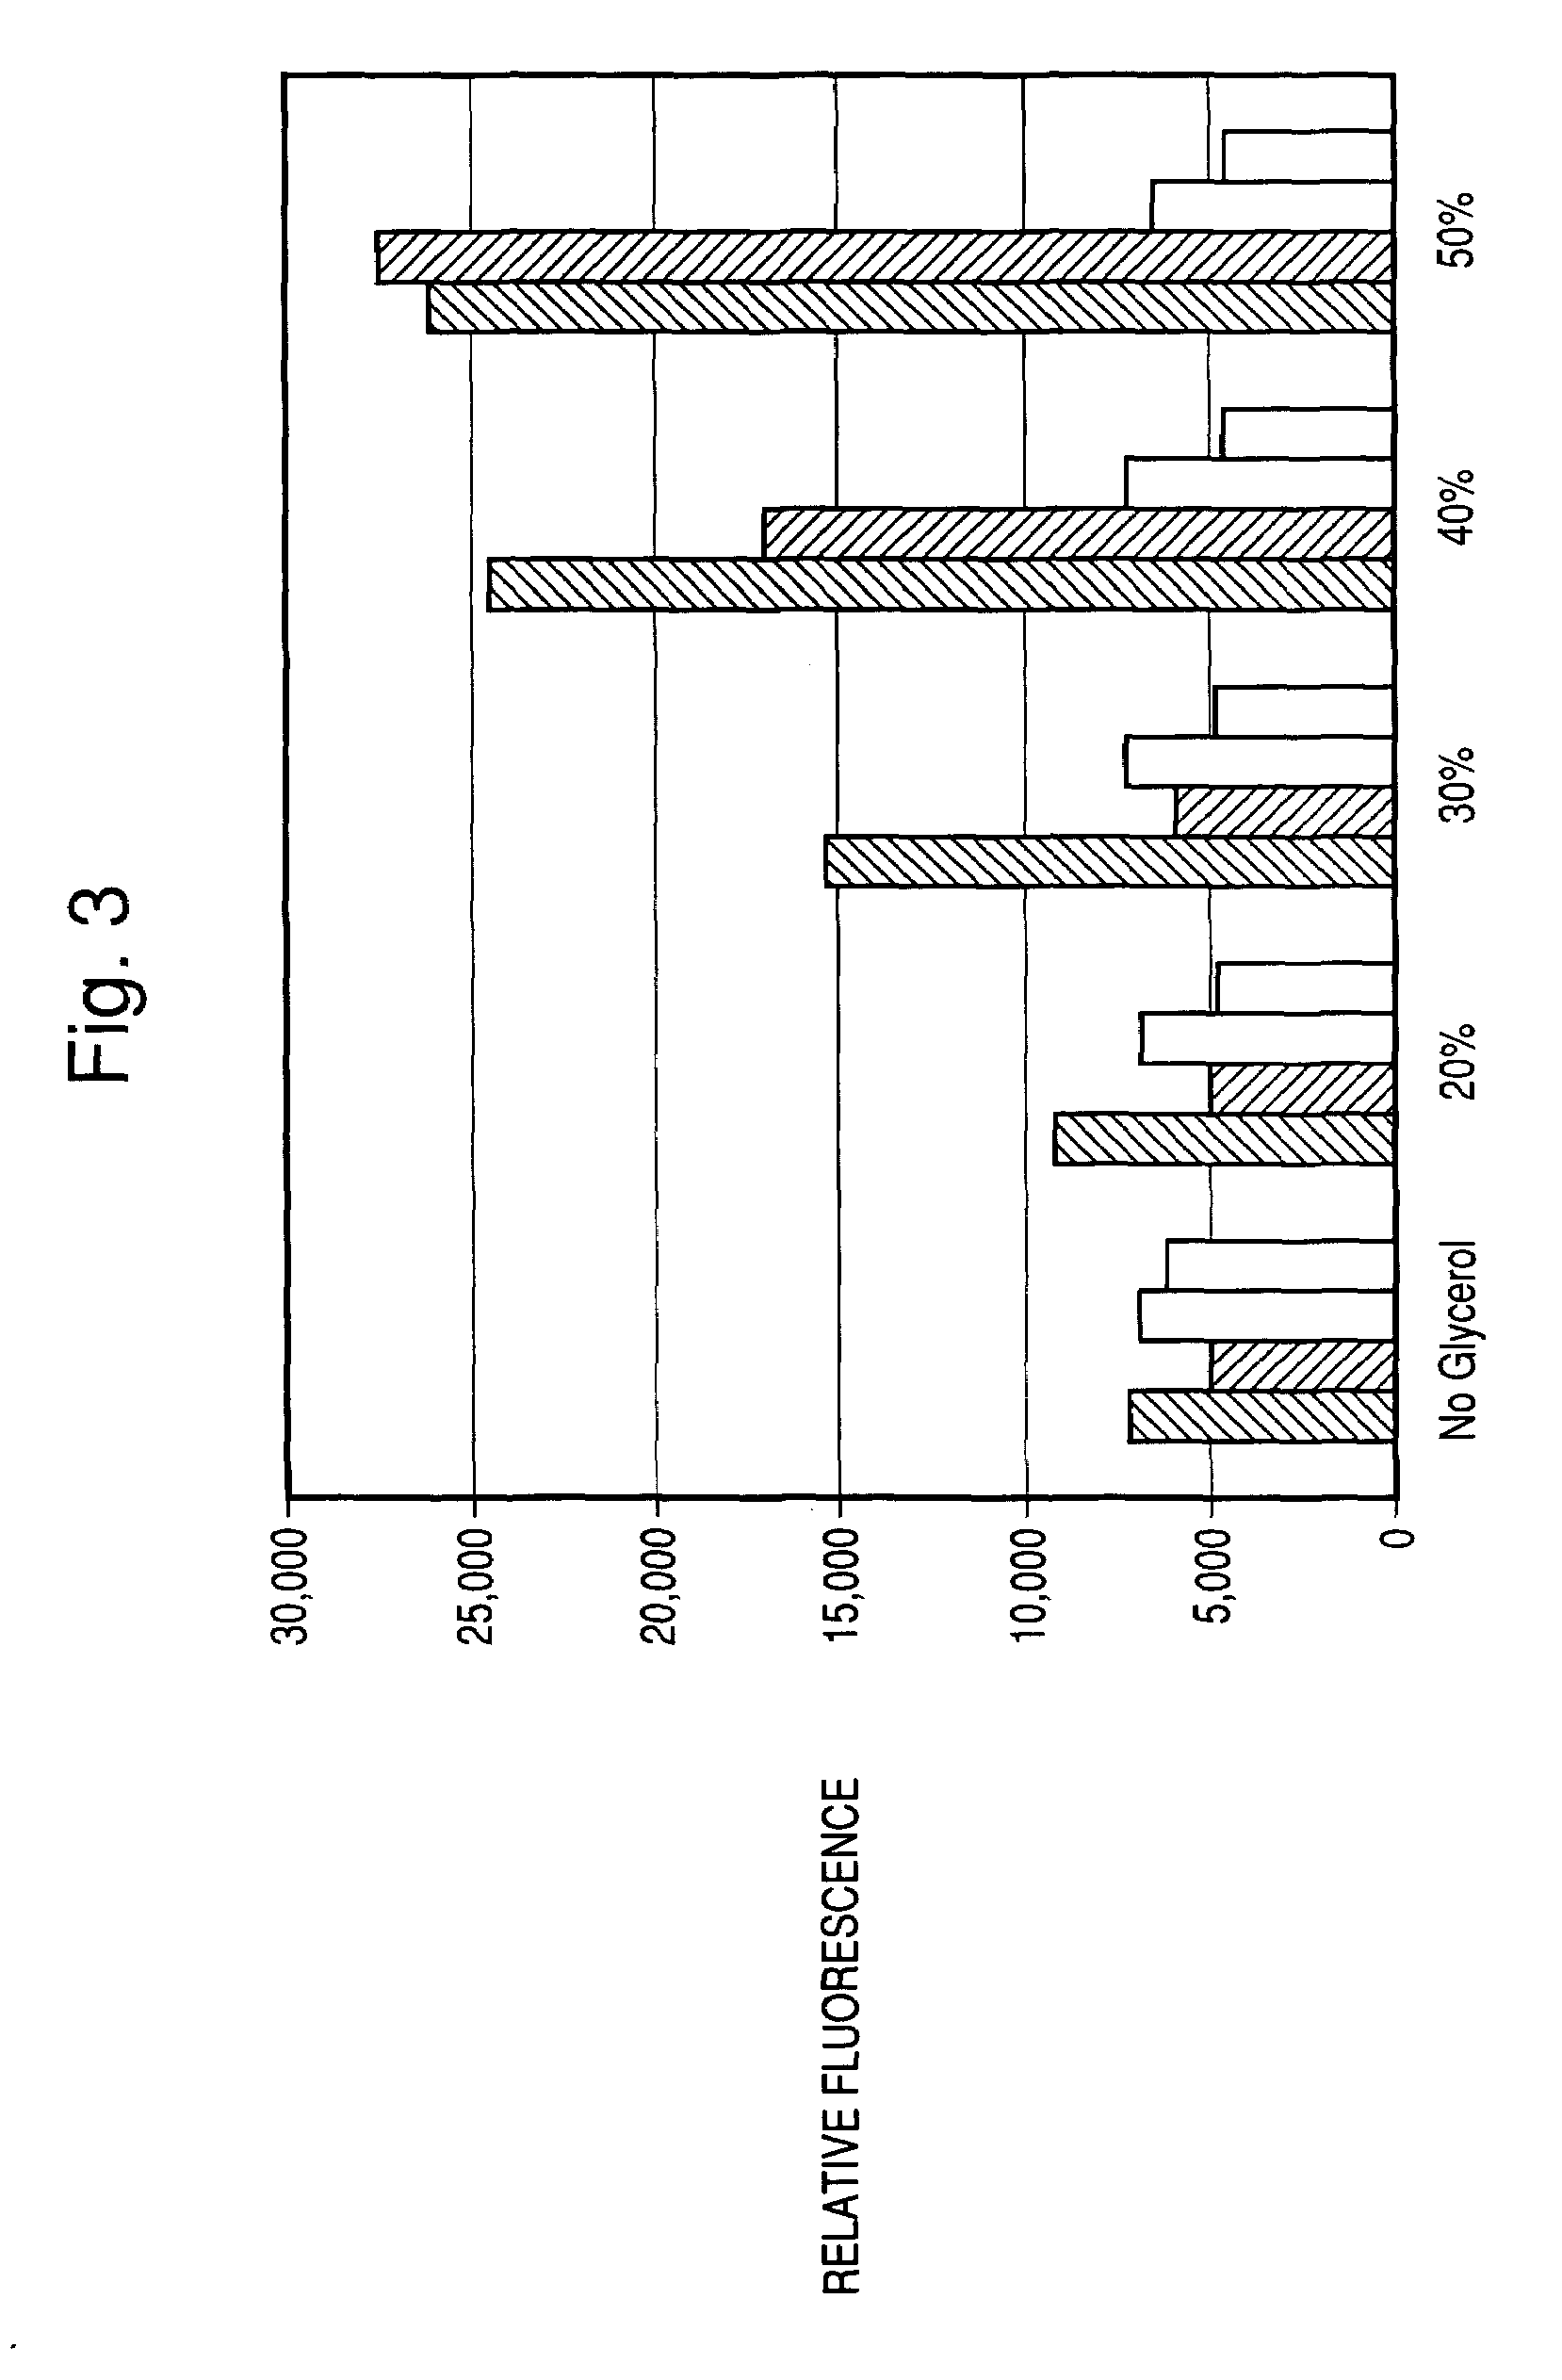 Methods and reagents for improved cell-based assays